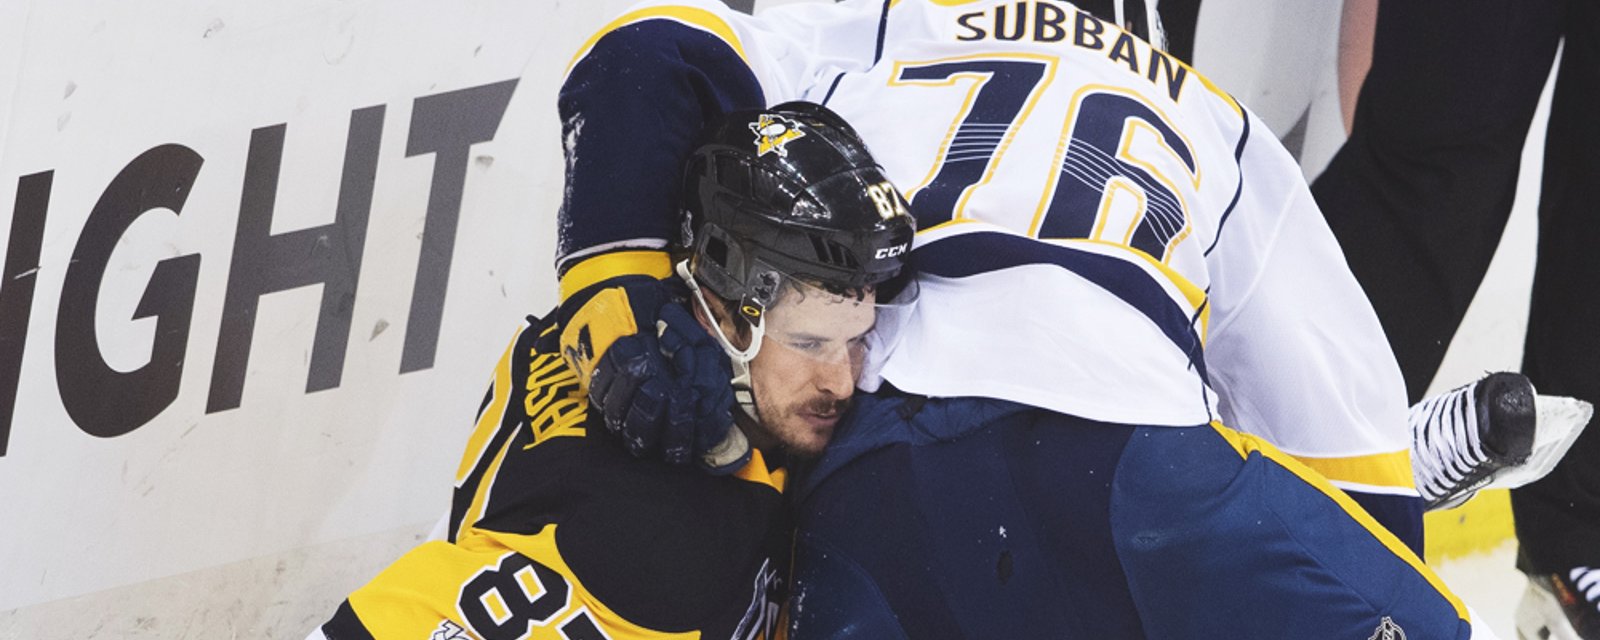 Sidney Crosby publicly adresses his relationship with P.K. Subban.